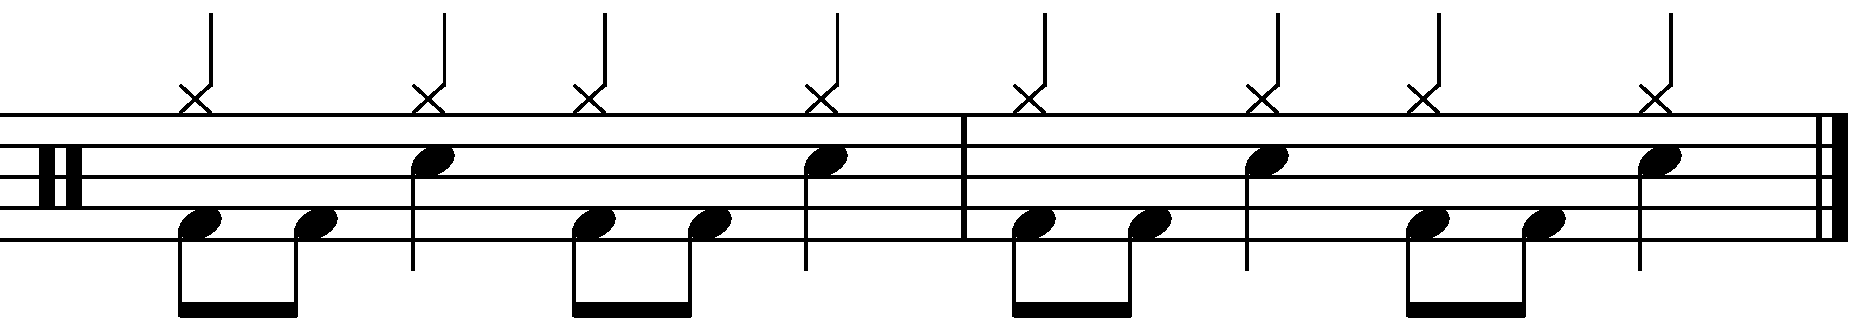 2 Bar Grooves - Example 1c